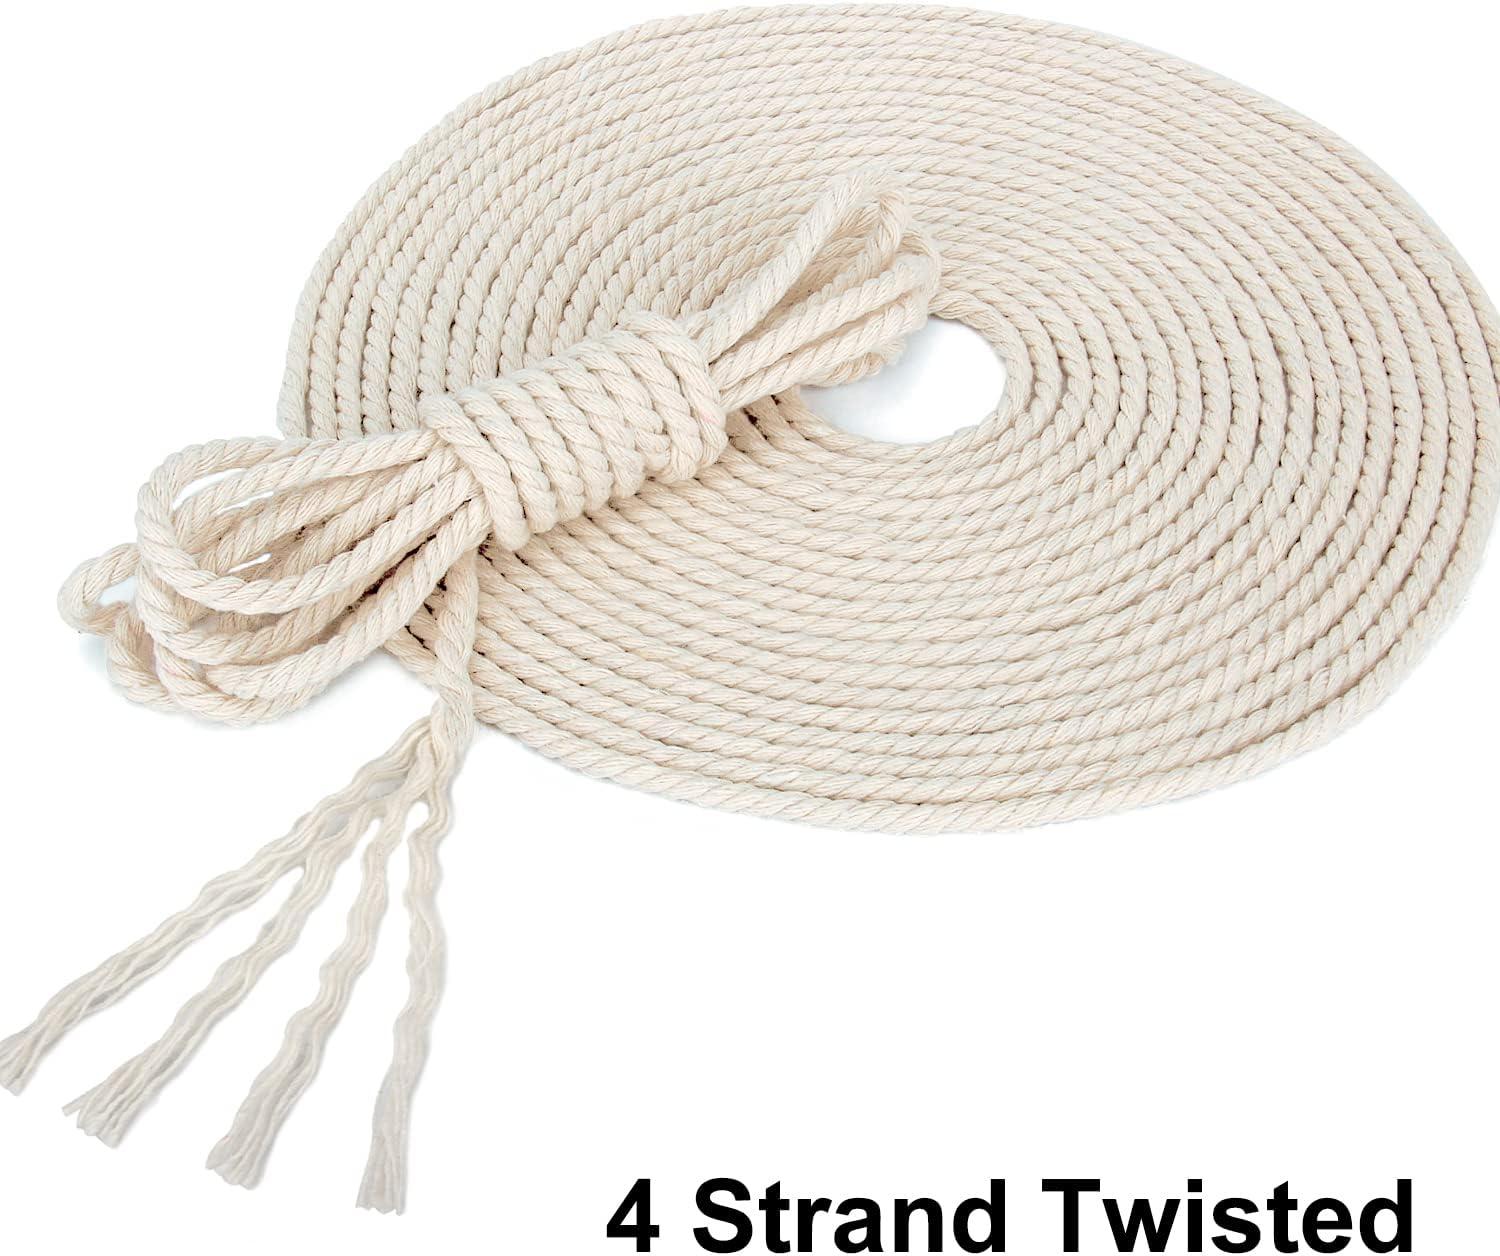 Blisstime Macrame Cord 3mm X 500 Yards Natural Cotton Macrame Rope 4 Strand Twisted  Cotton Cord Soft Undyed Cotton Rope for Wall Hangings Plant Hangers Crafts  Knitting Decorative Projects Off White 3mm 500 Yards